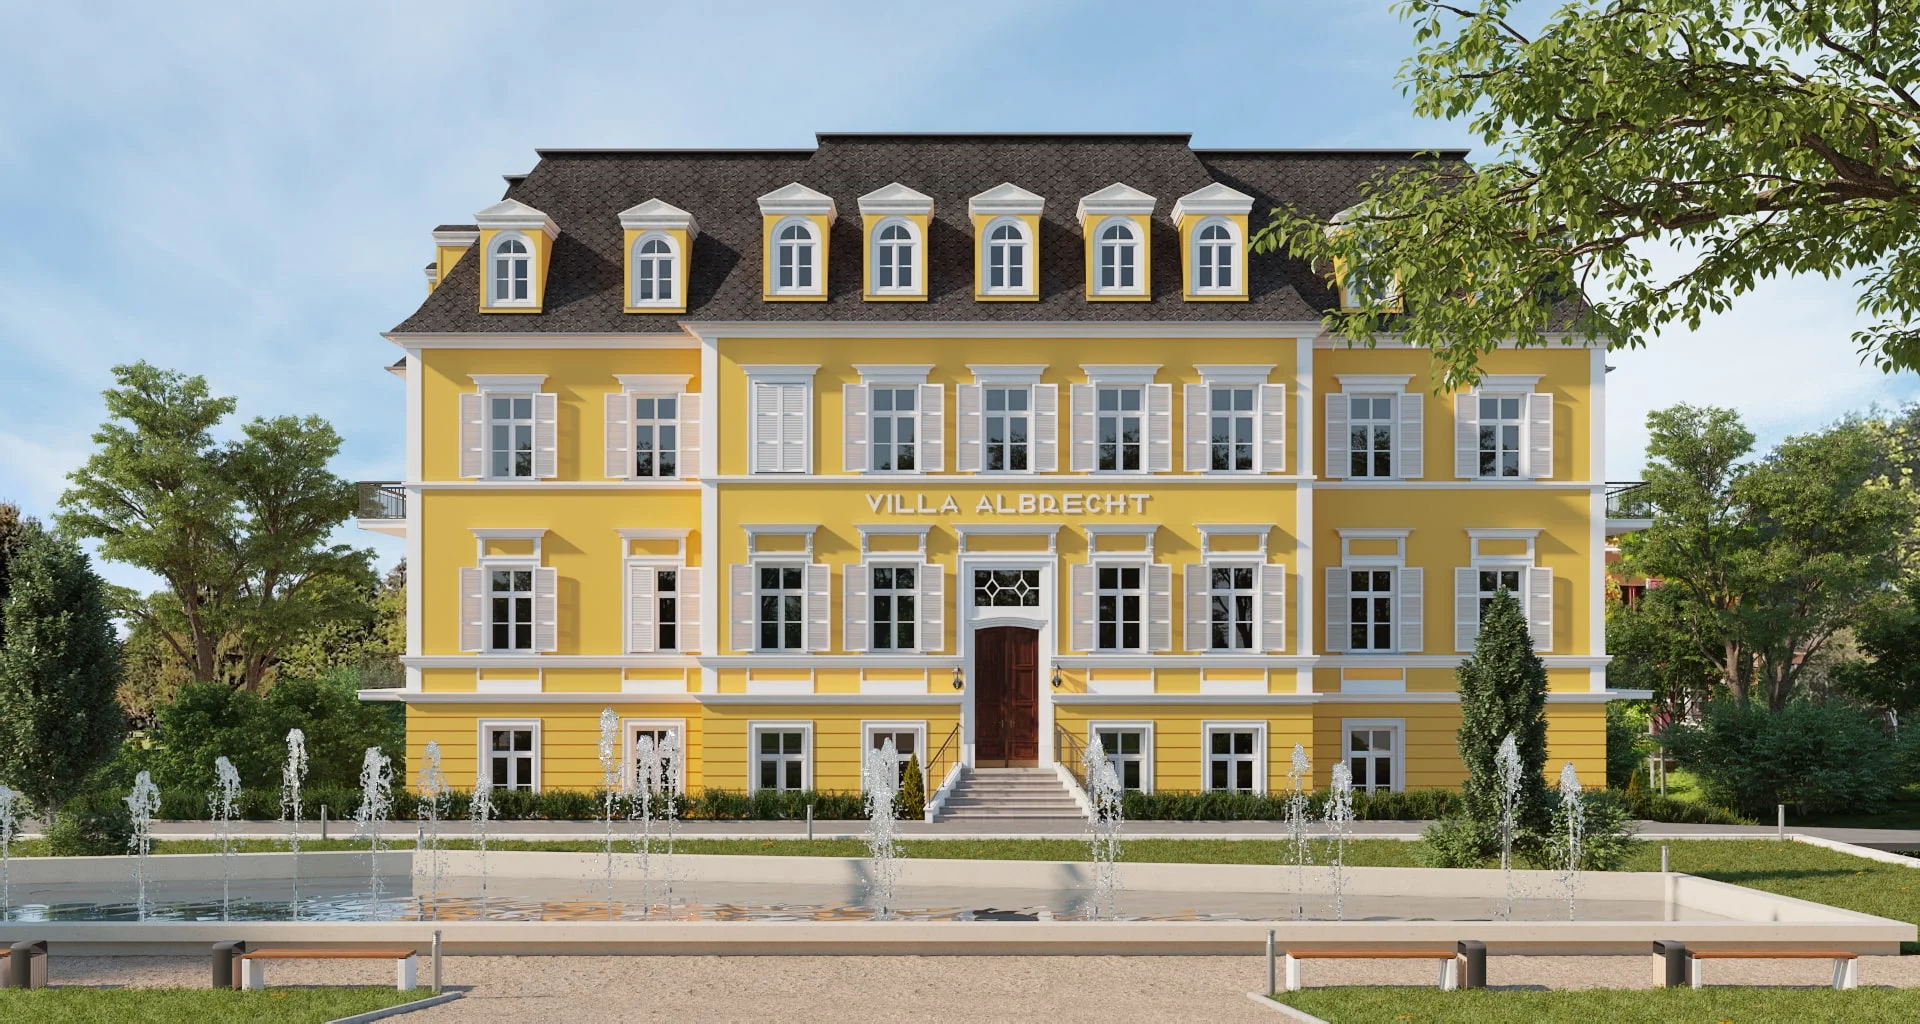 Architectural visualization. Villa Albrecht. Main view from the fountain